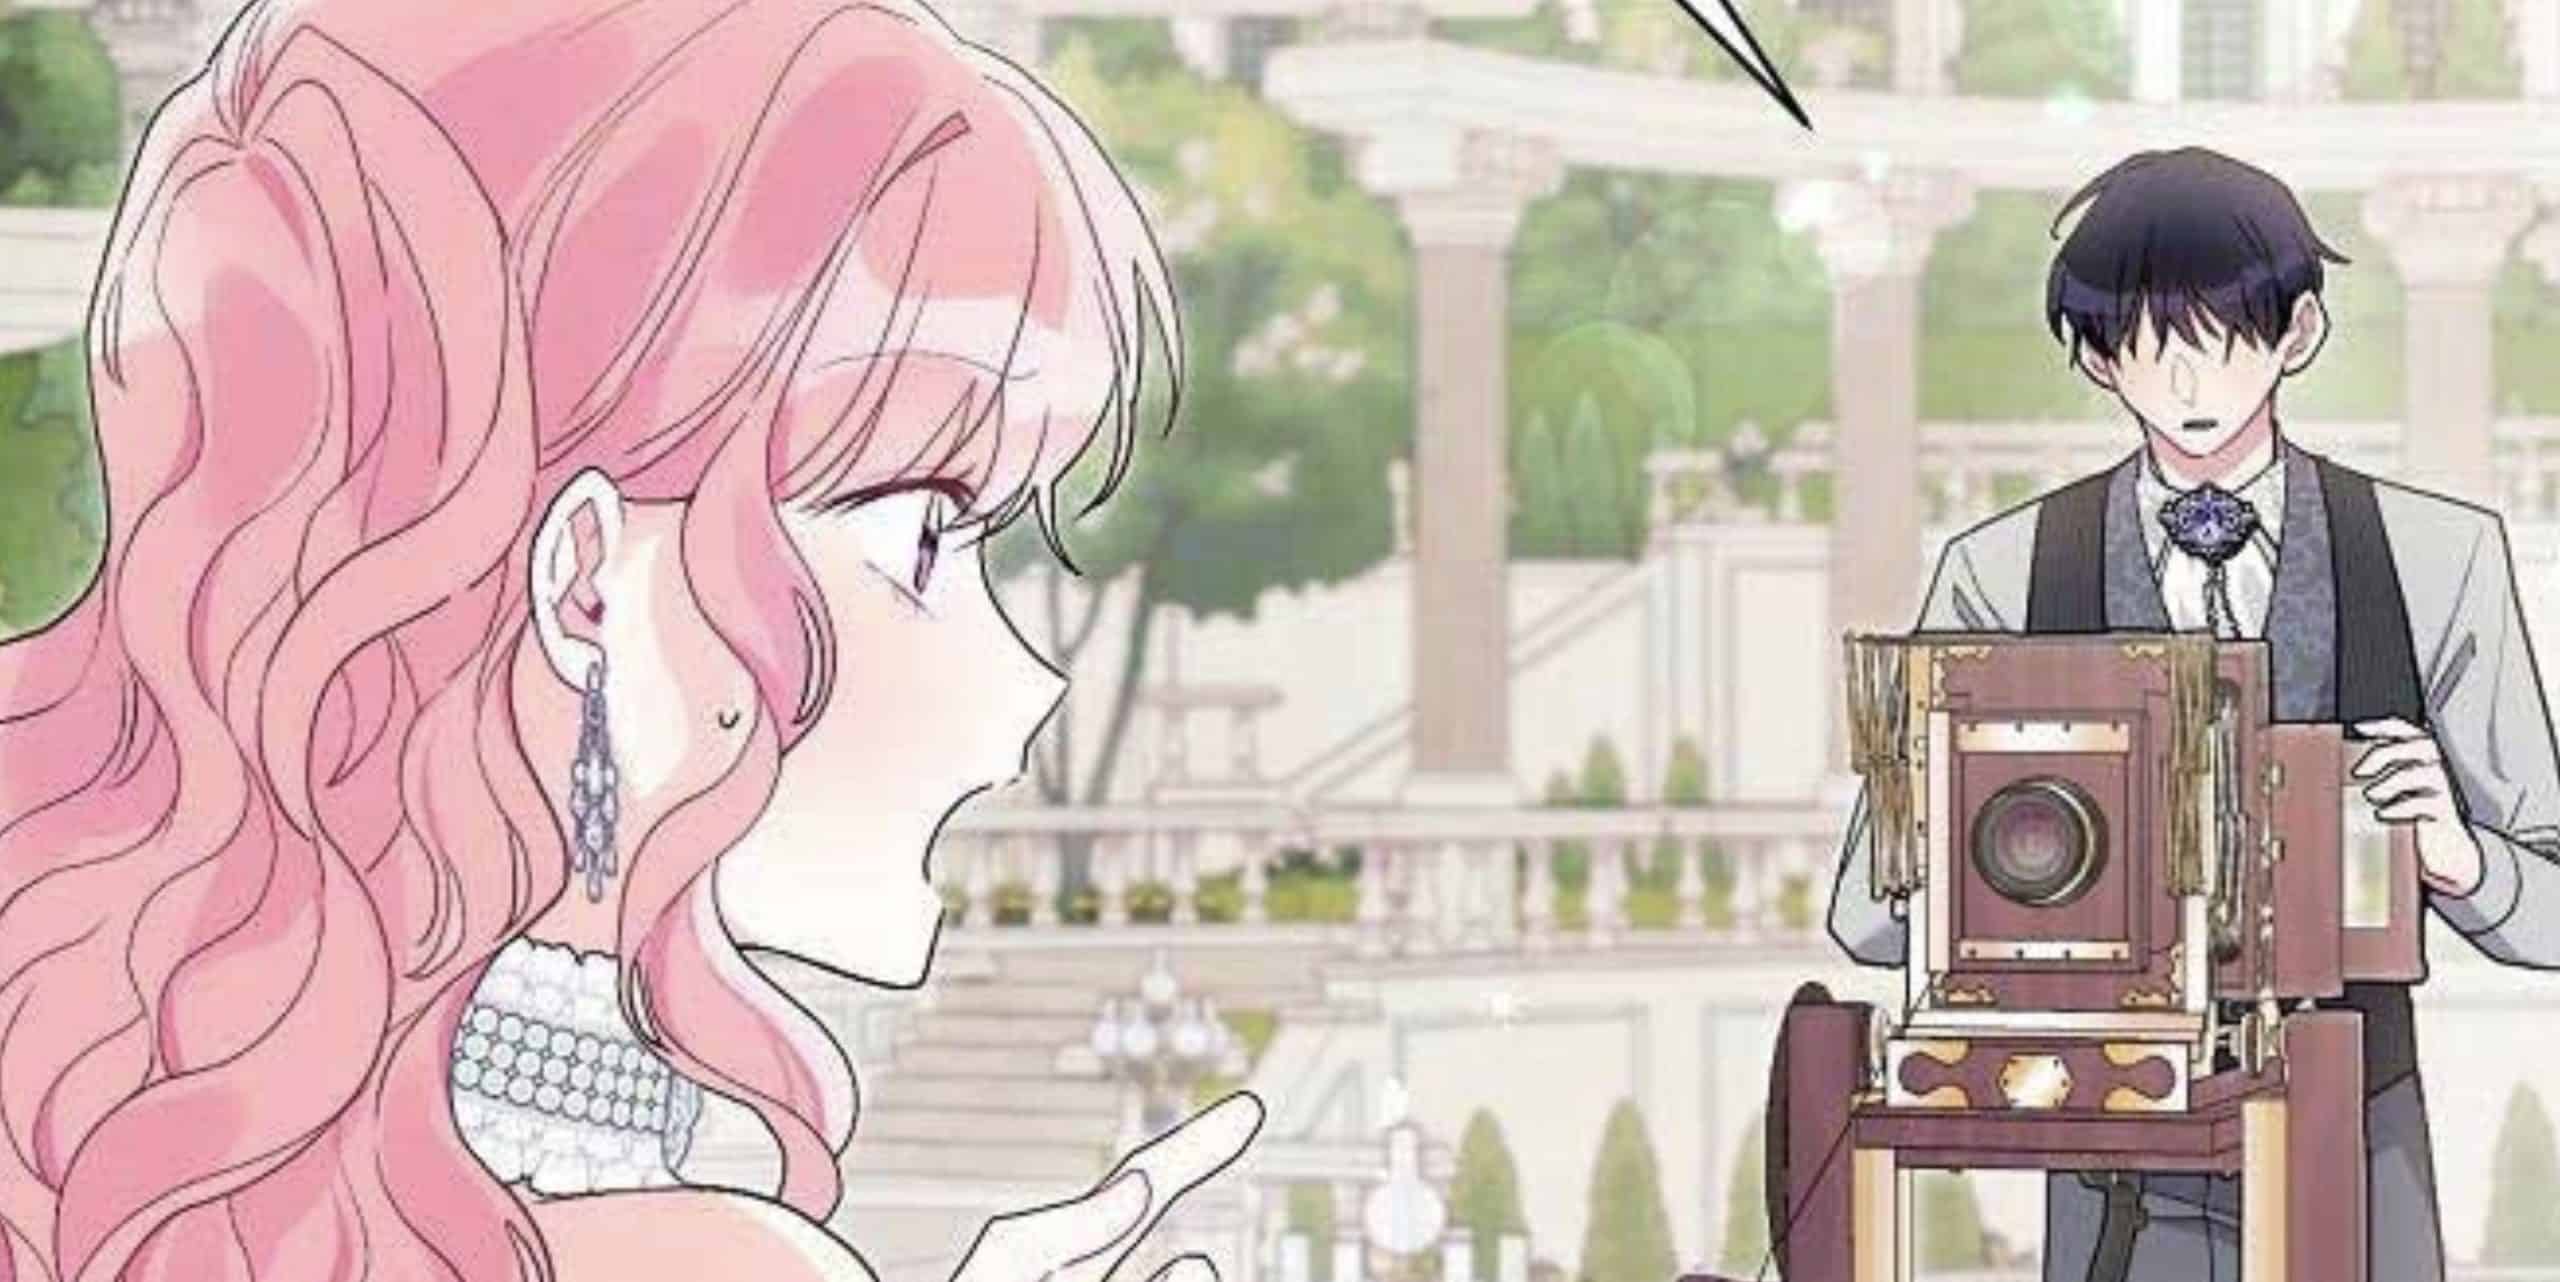 the villain’s daughter-in-law has limited time chapter 70 release date